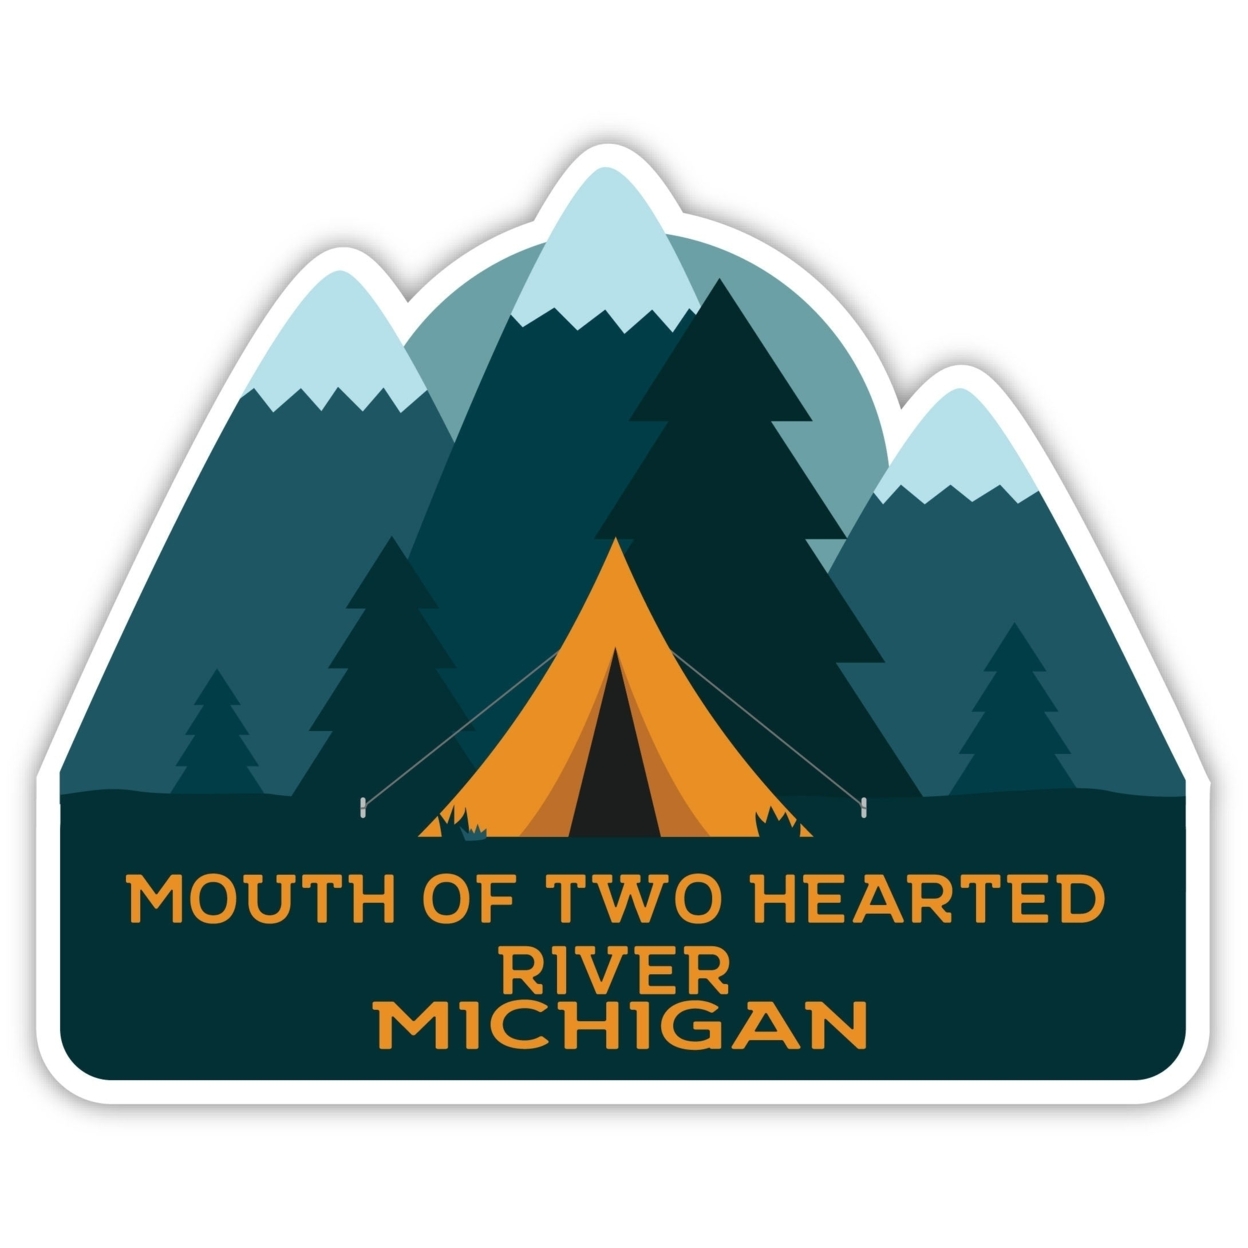 Mouth Of Two Hearted River Michigan Souvenir Decorative Stickers (Choose Theme And Size) - Single Unit, 4-Inch, Tent